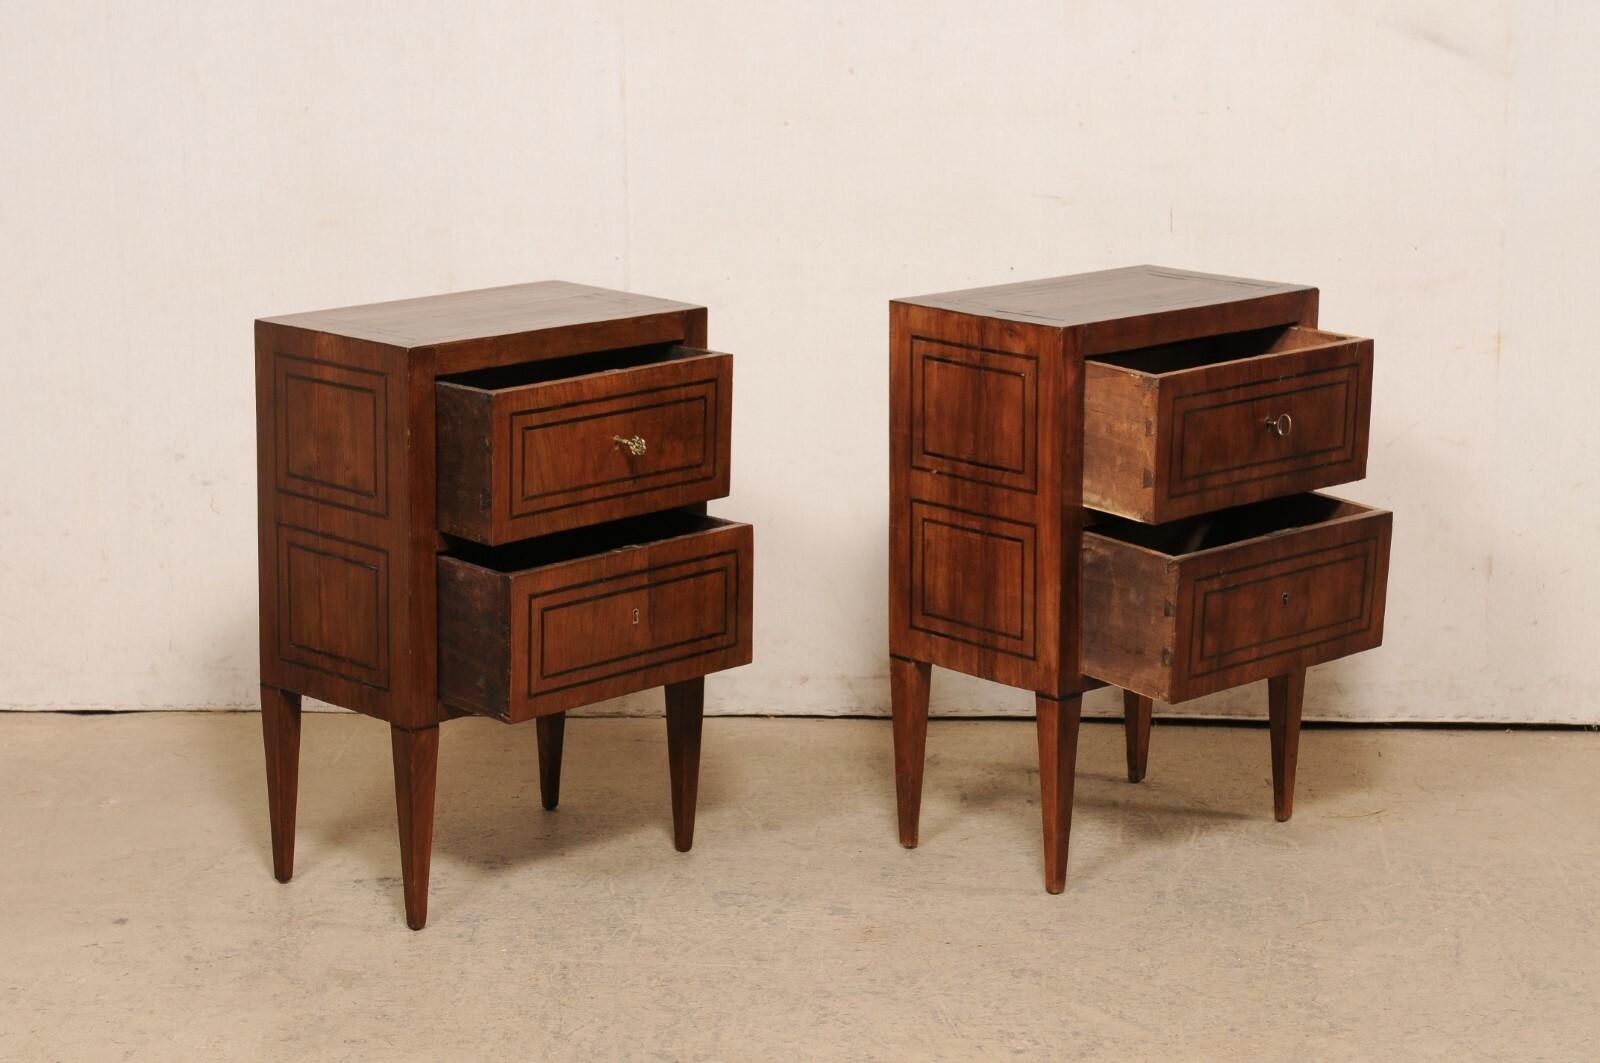 Italian Pair of Two-Drawer Side Chests w/Nice Inlay Banding, Early 19th C. For Sale 1